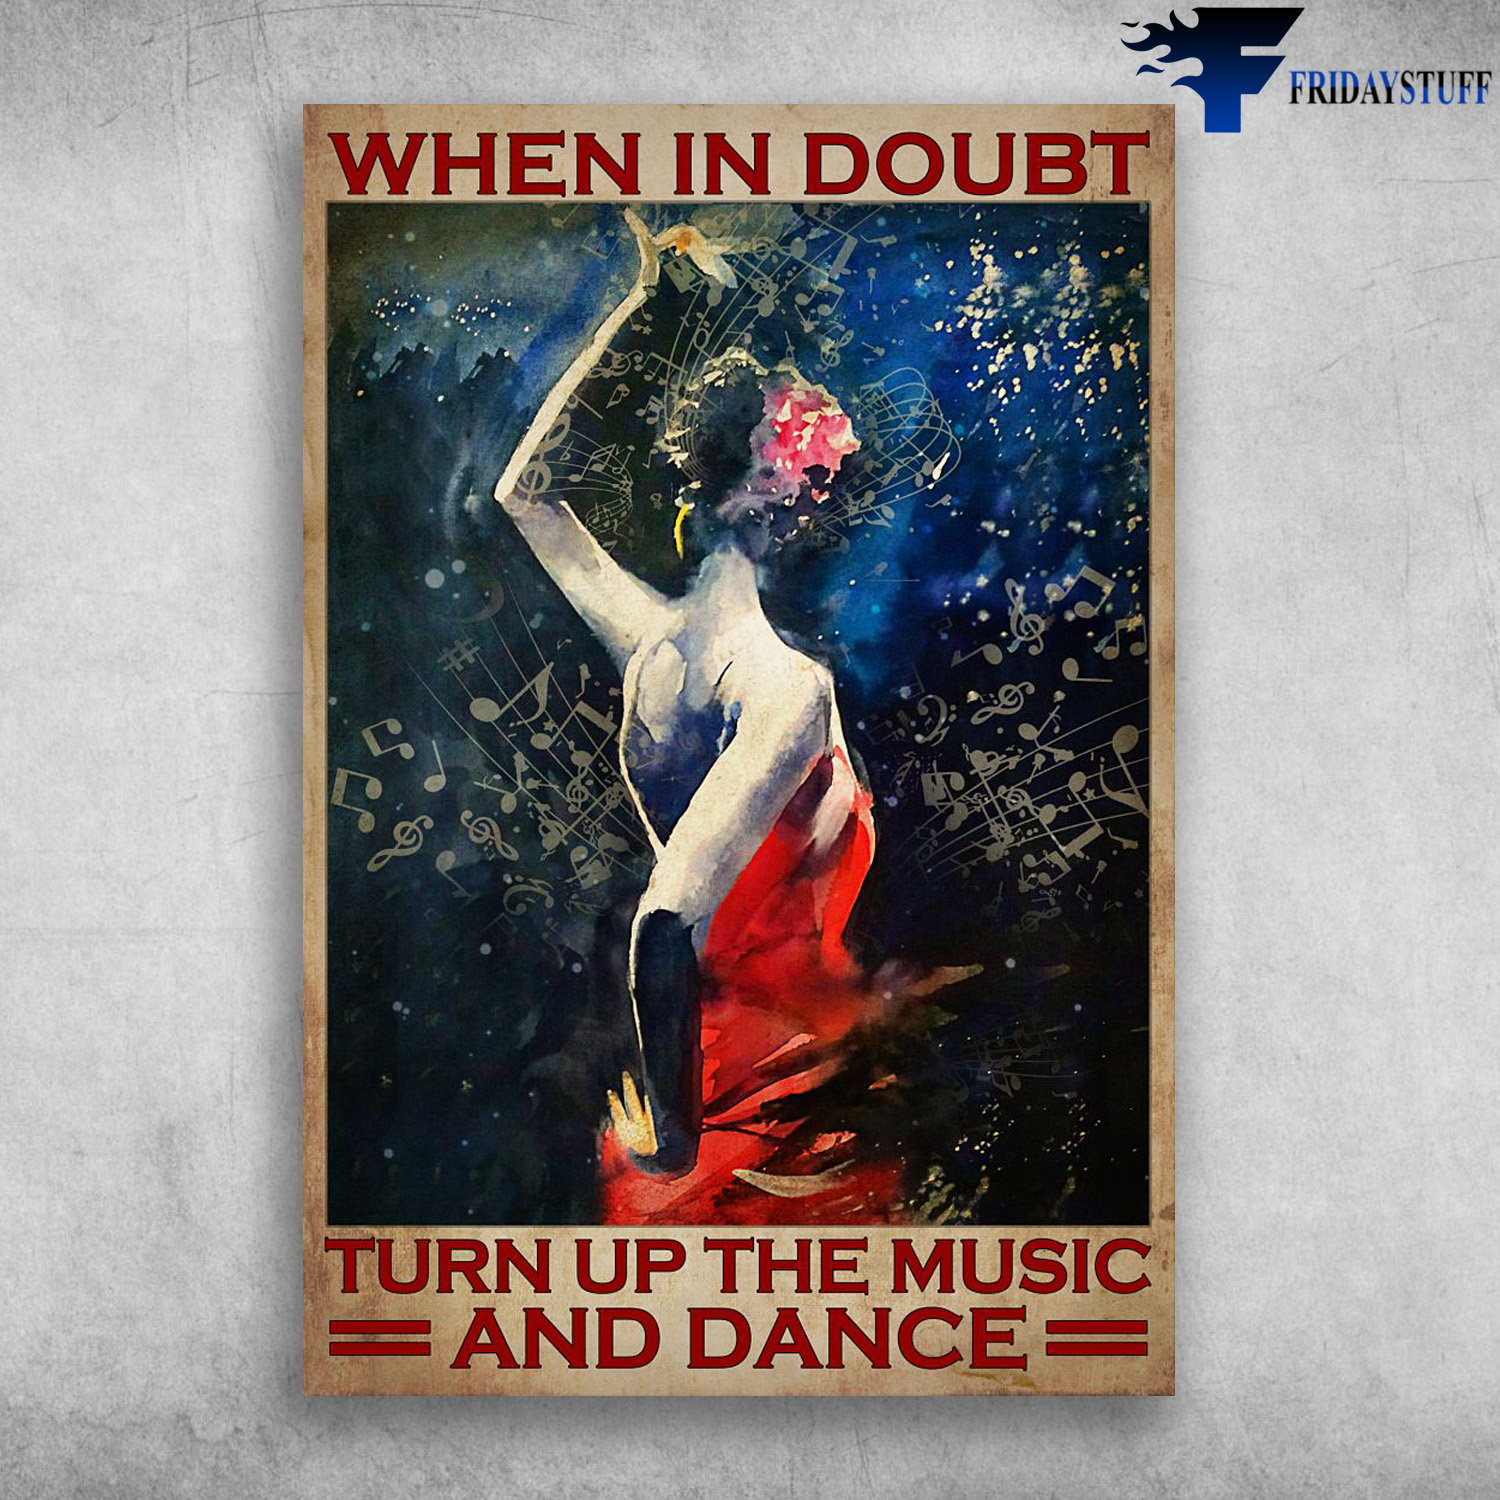 Girl Dancing In The Music - When In Doubt, Turn Up The Music And Dance